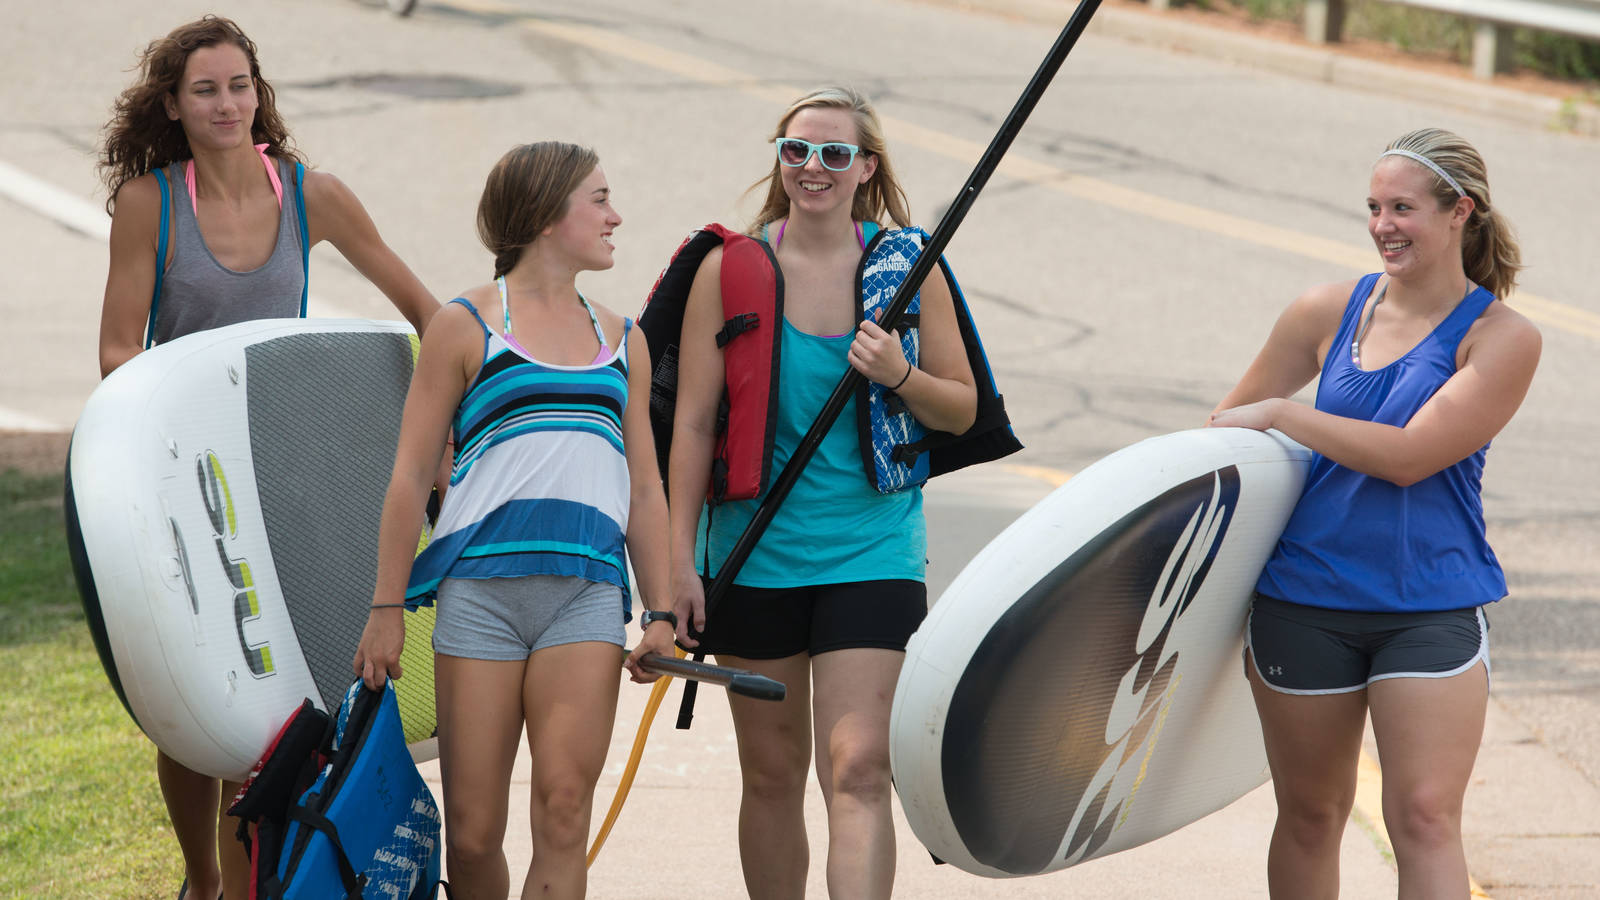 Students heading out to river float with rented paddle boards and tubes